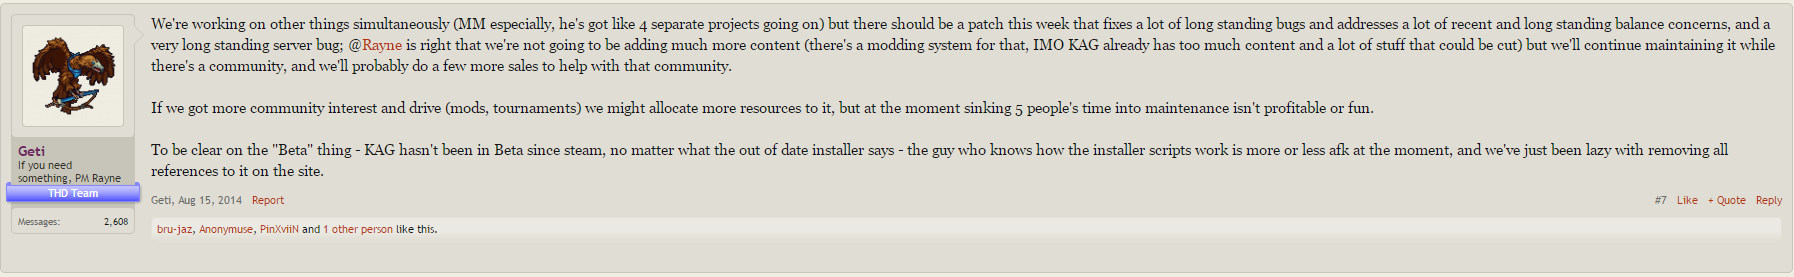 Reliance on modding for continued development.png